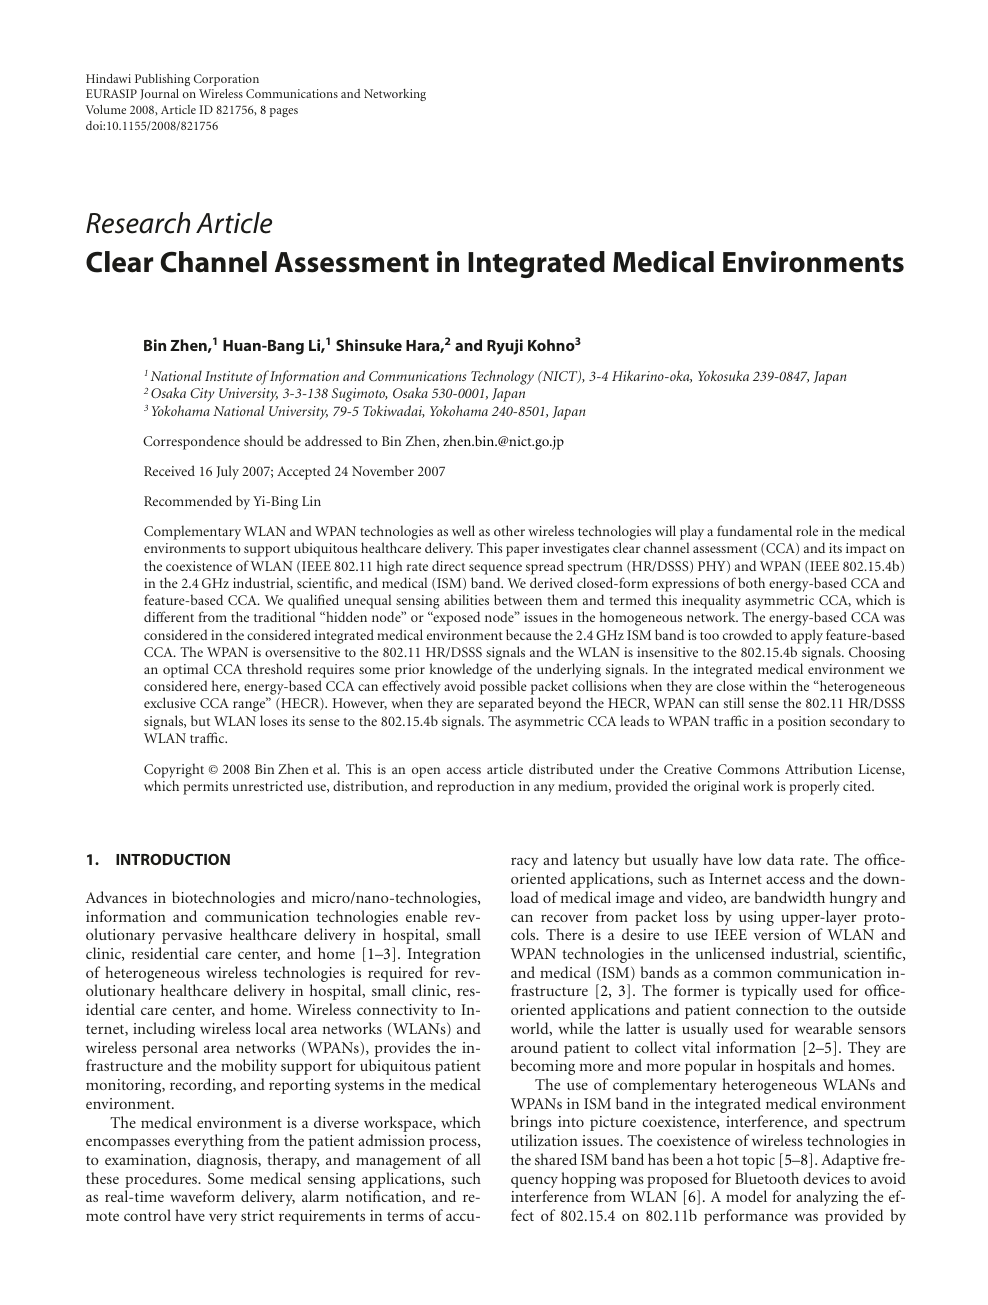 Clear Channel Assessment in Integrated Medical Environments